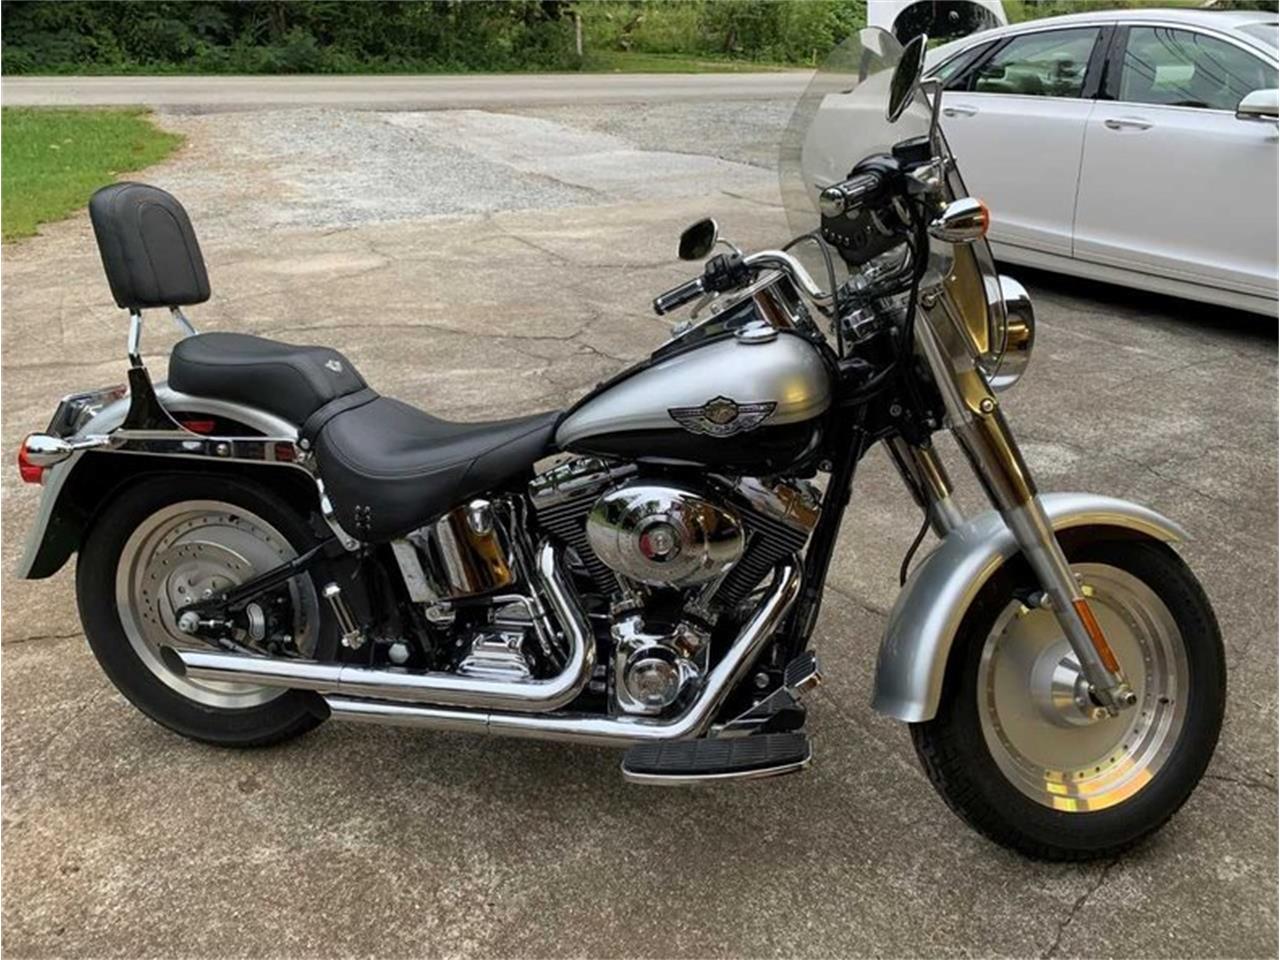 2003 Harley-Davidson Motorcycle for Sale | ClassicCars.com ...